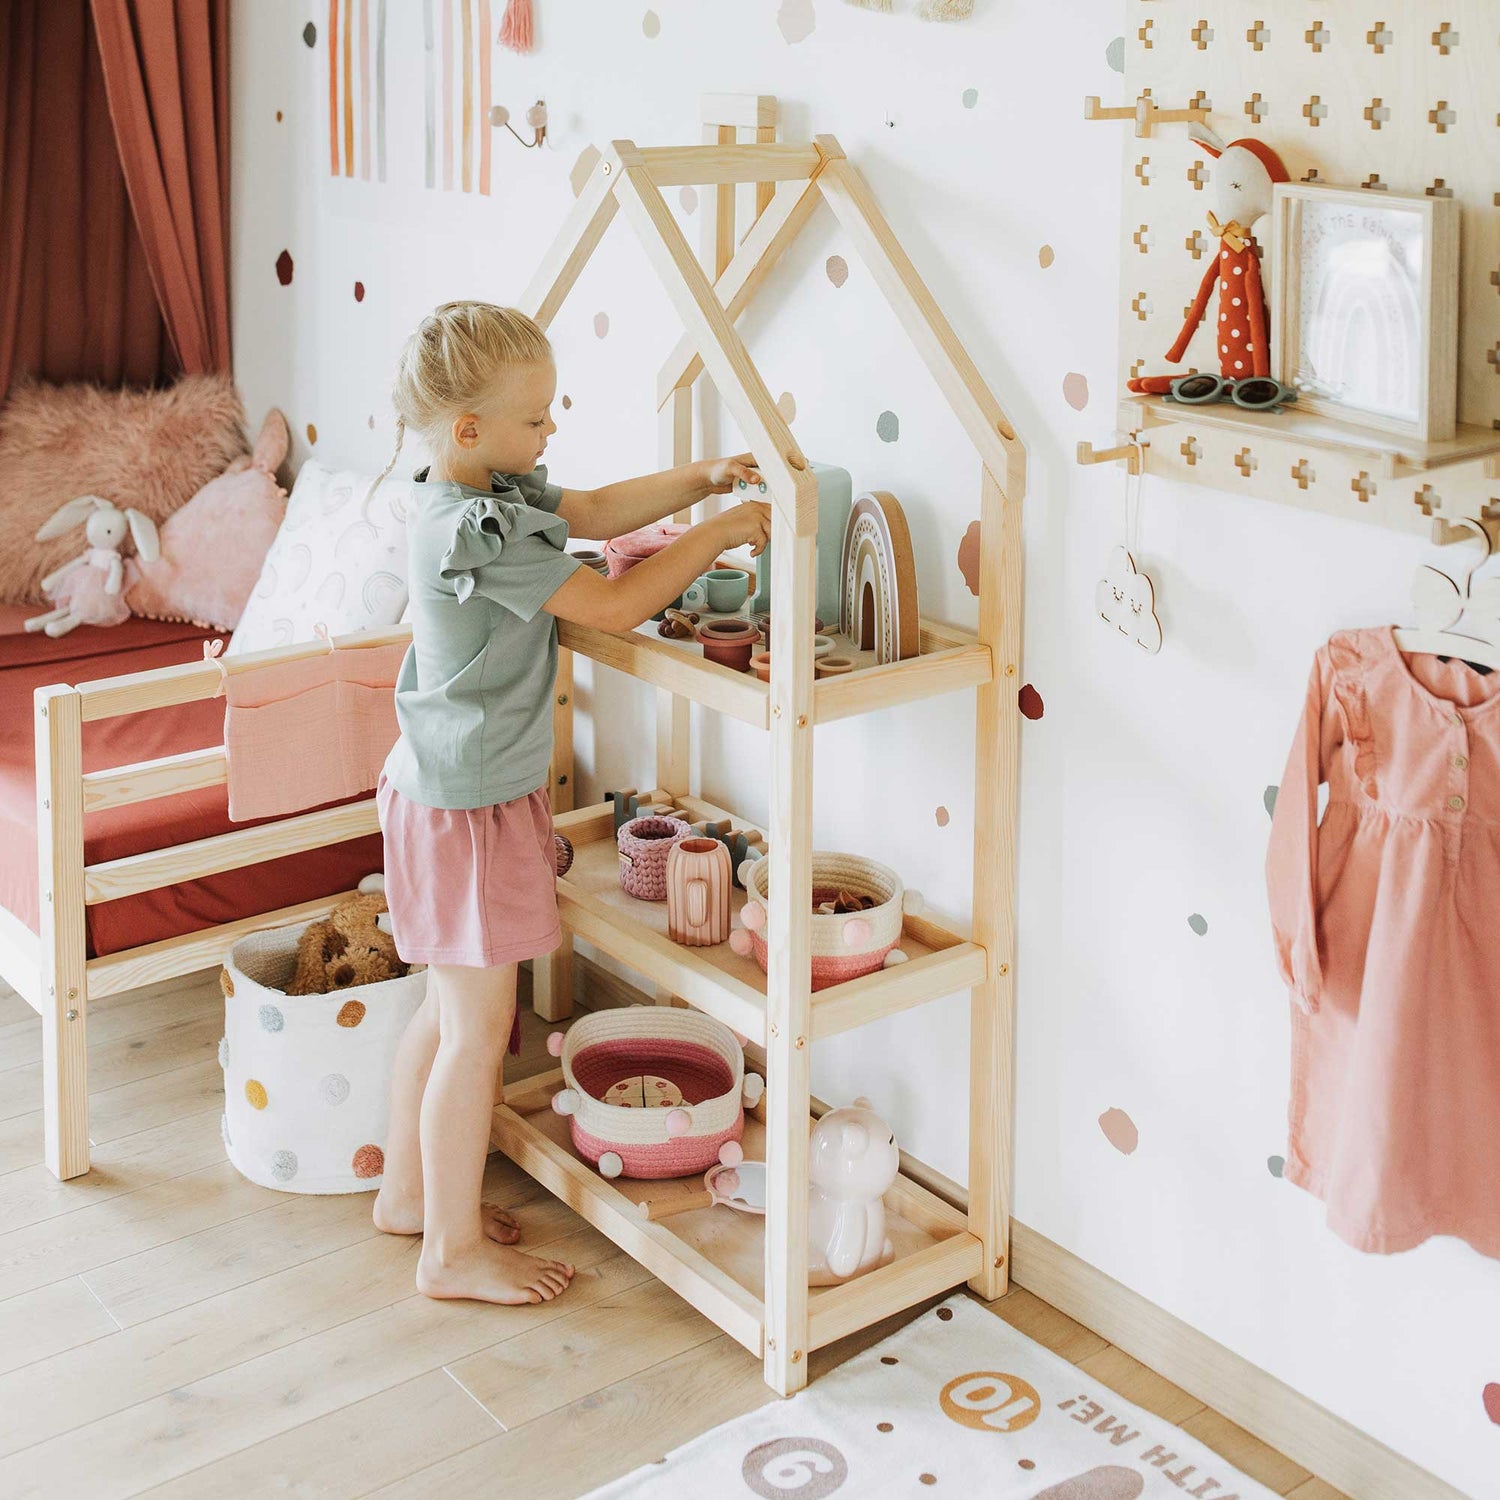 A little girl in a pink room with polka dots.